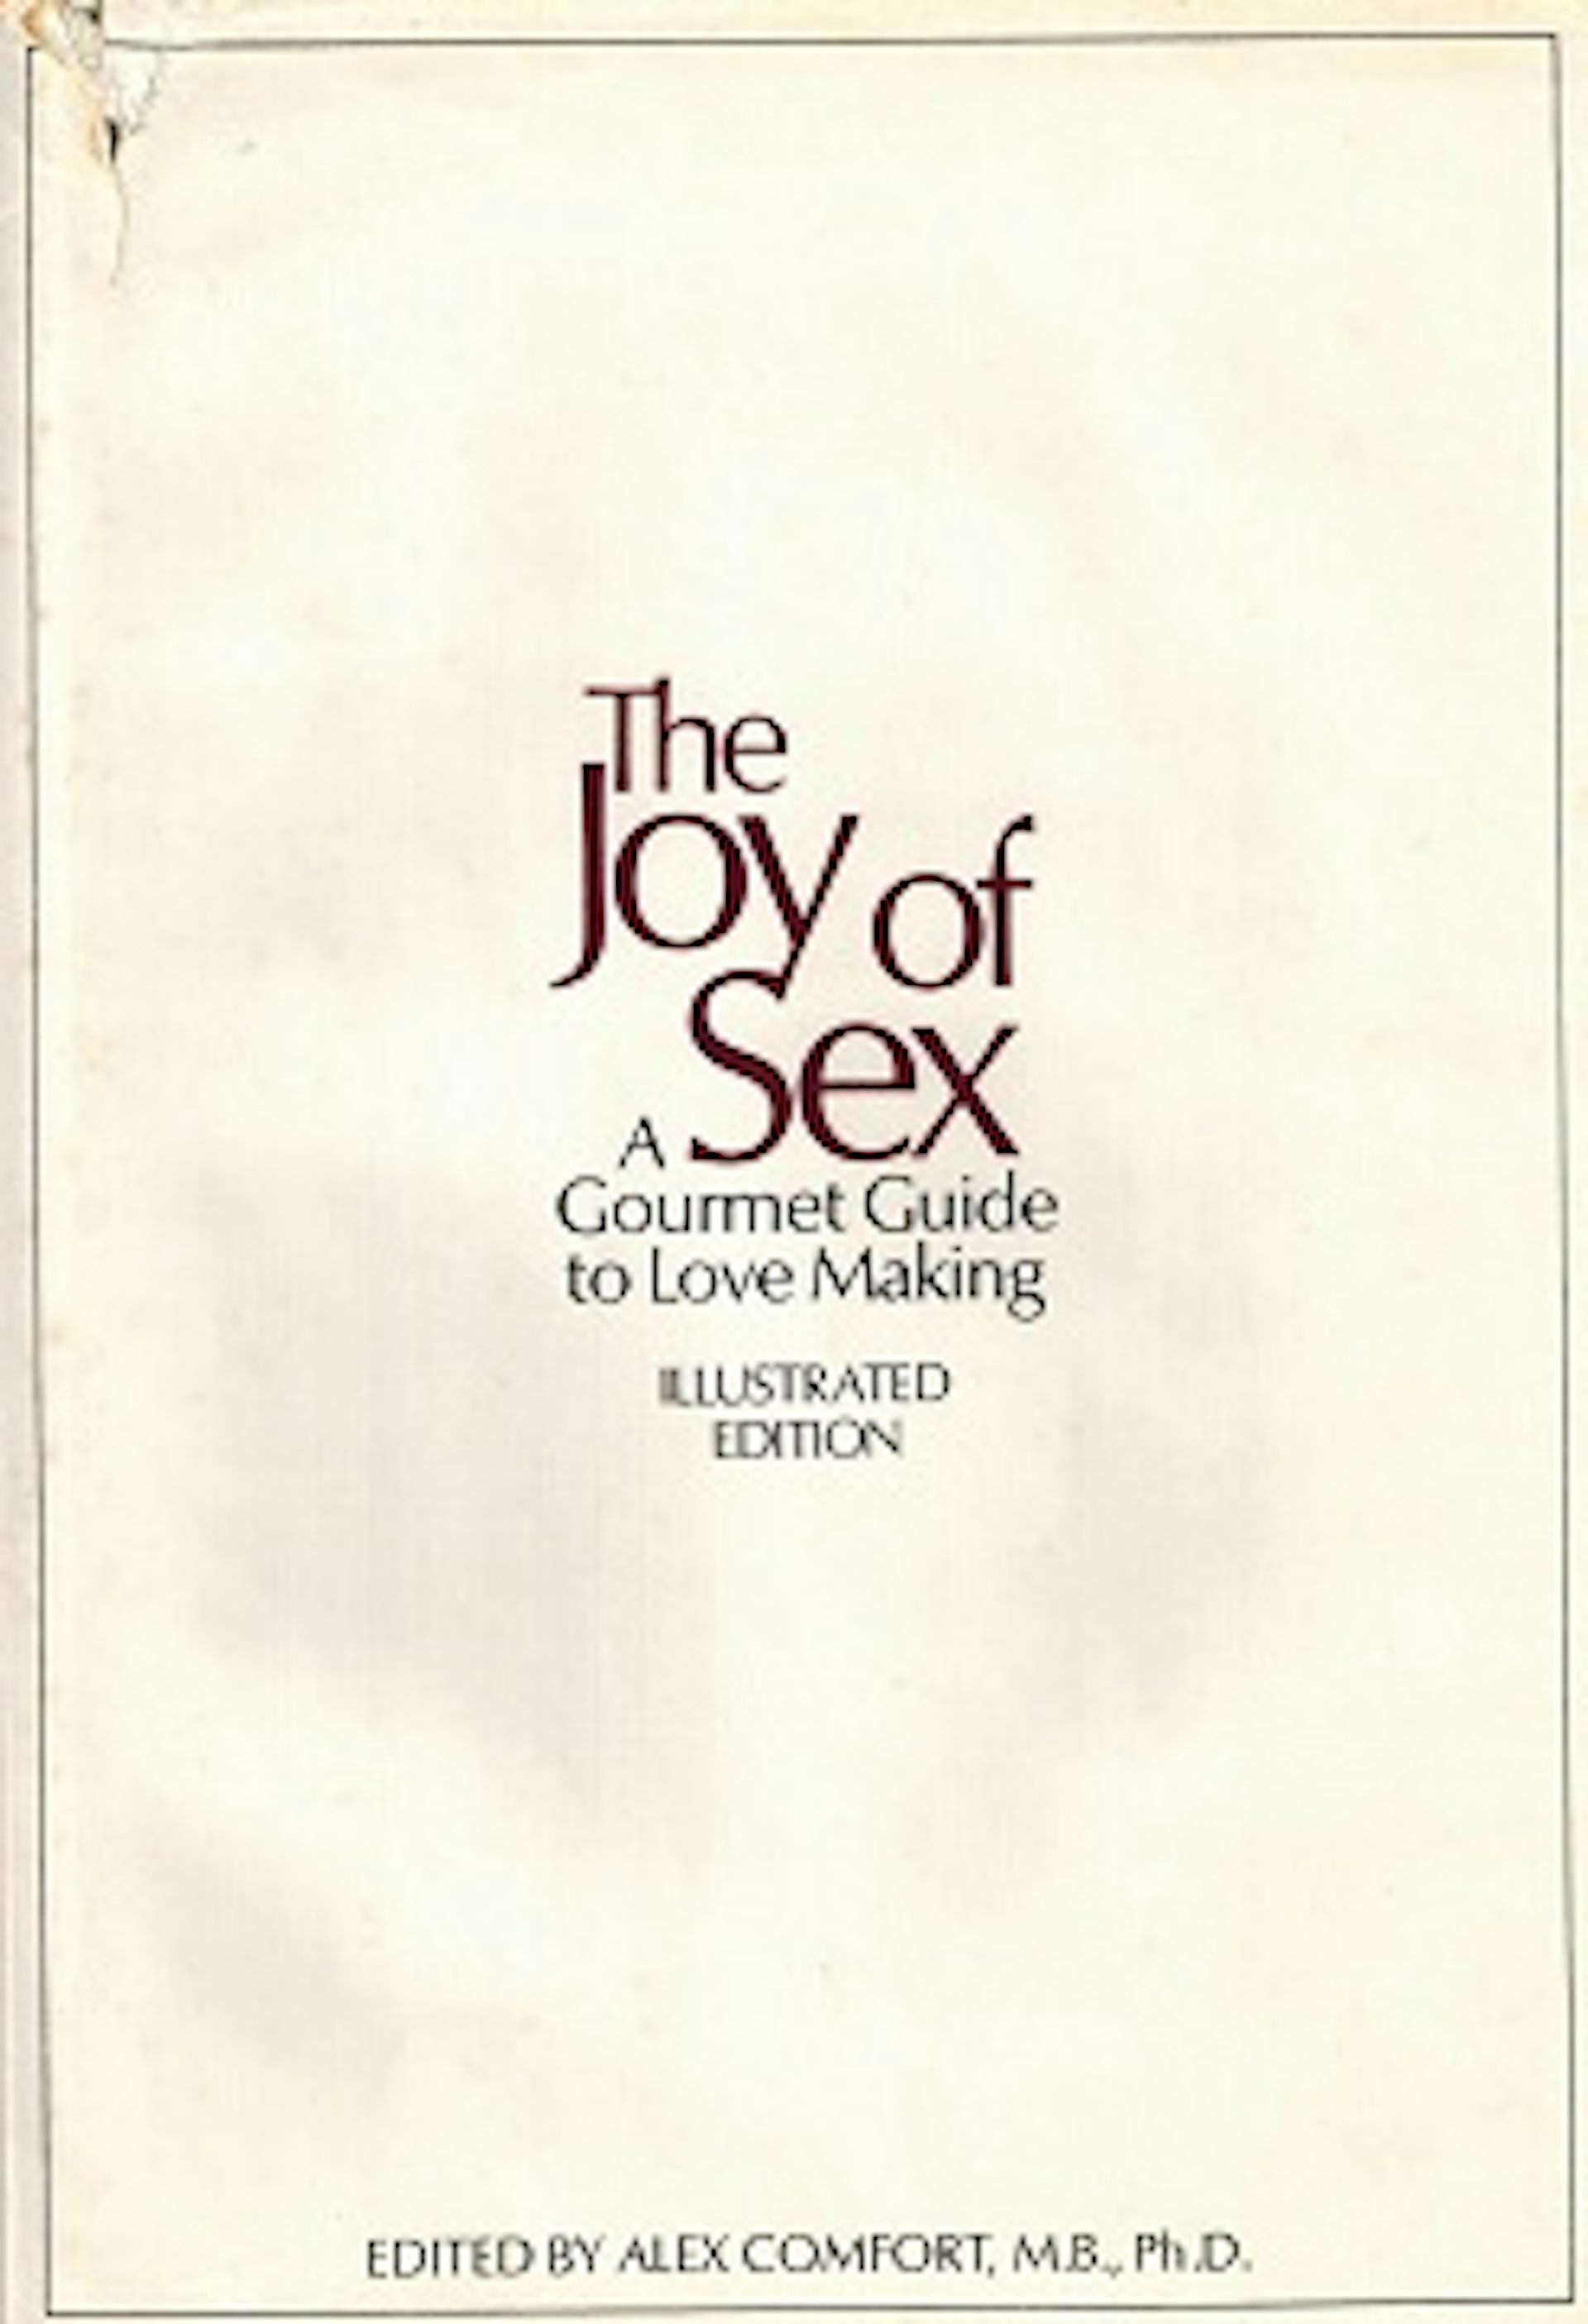 50 years on, The Joy of Sex is outdated in parts but still a fun unanxious romp image